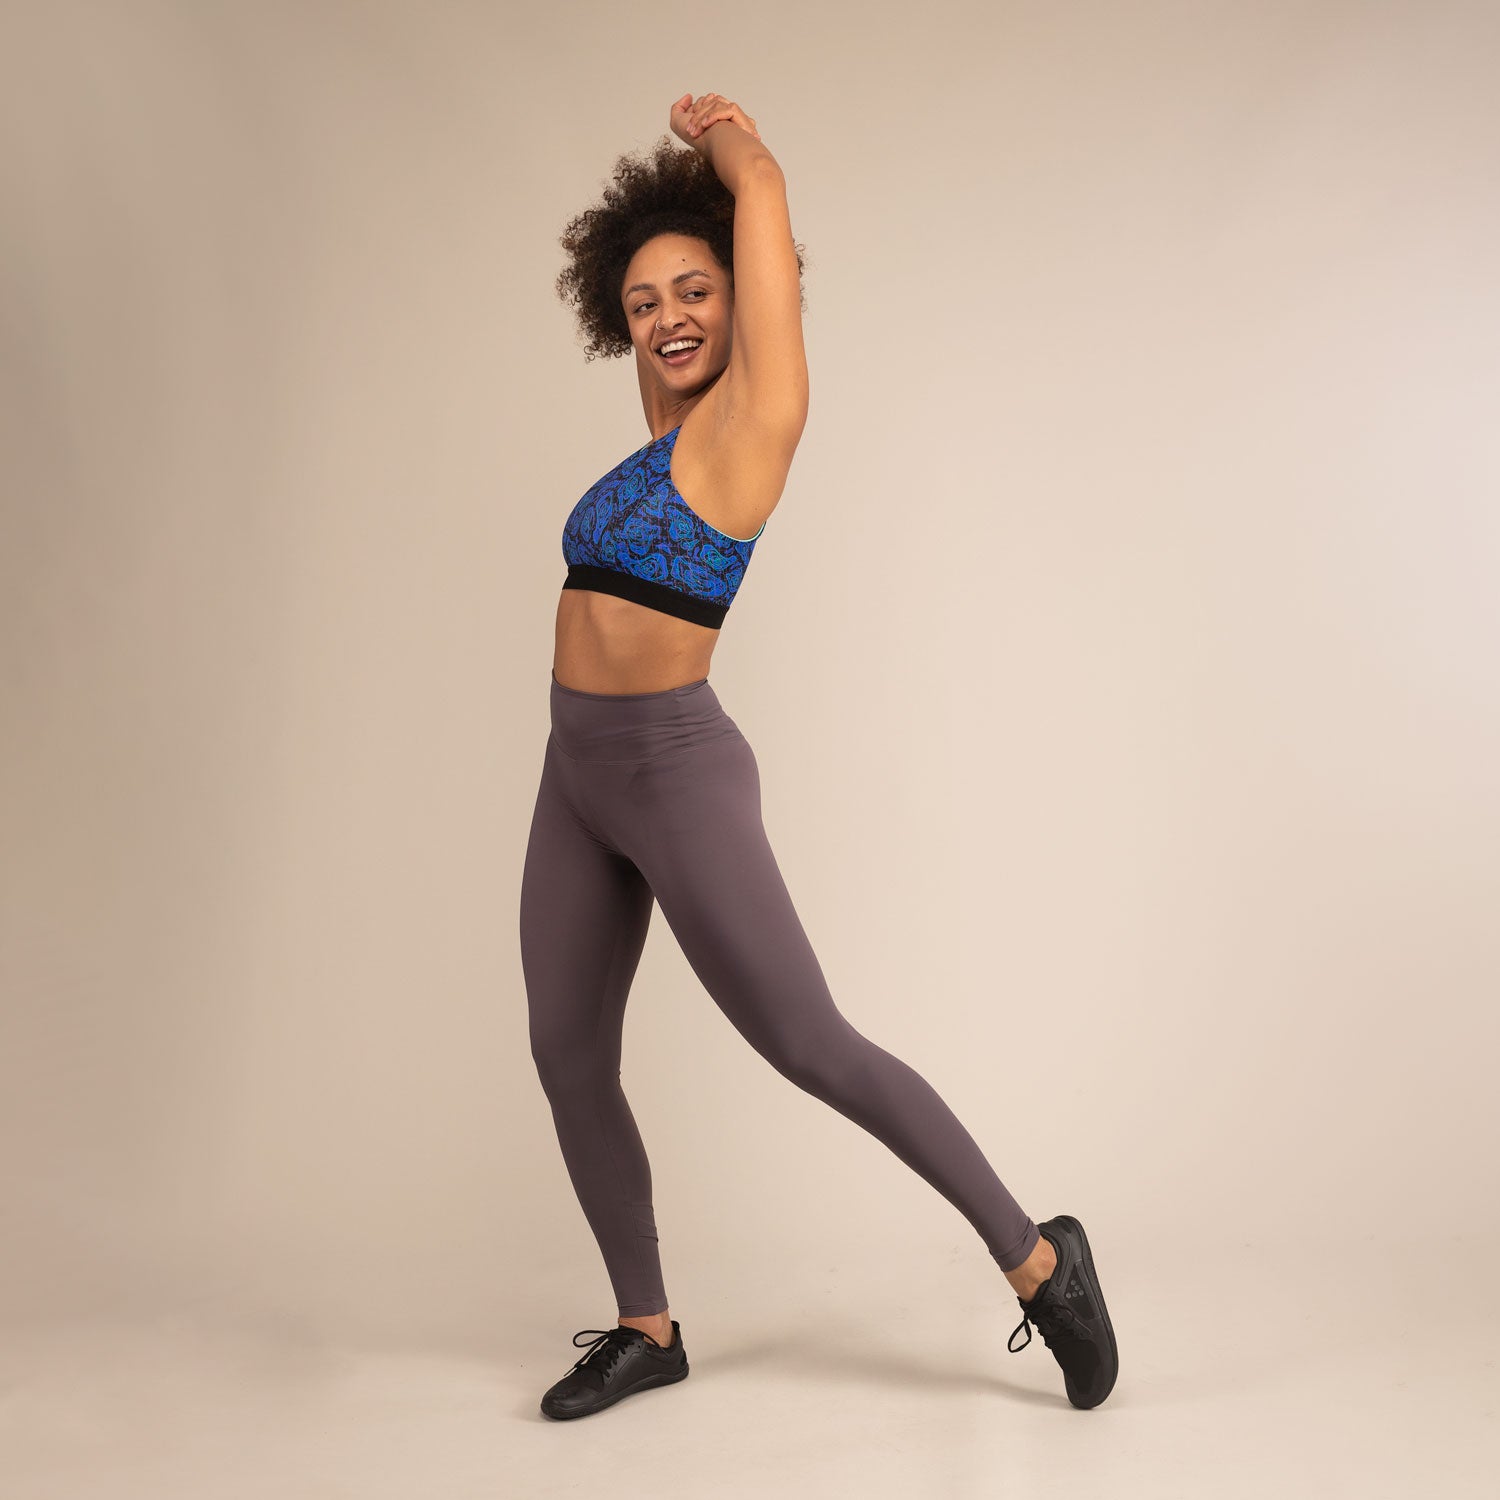 EQUINOX GEO JAGUAR | Reversible Recycled Sports Bra | 3RD ROCK Clothing -  Kendal is a 34D with a 32" underbust, 36" overbust and wears a size 12 F